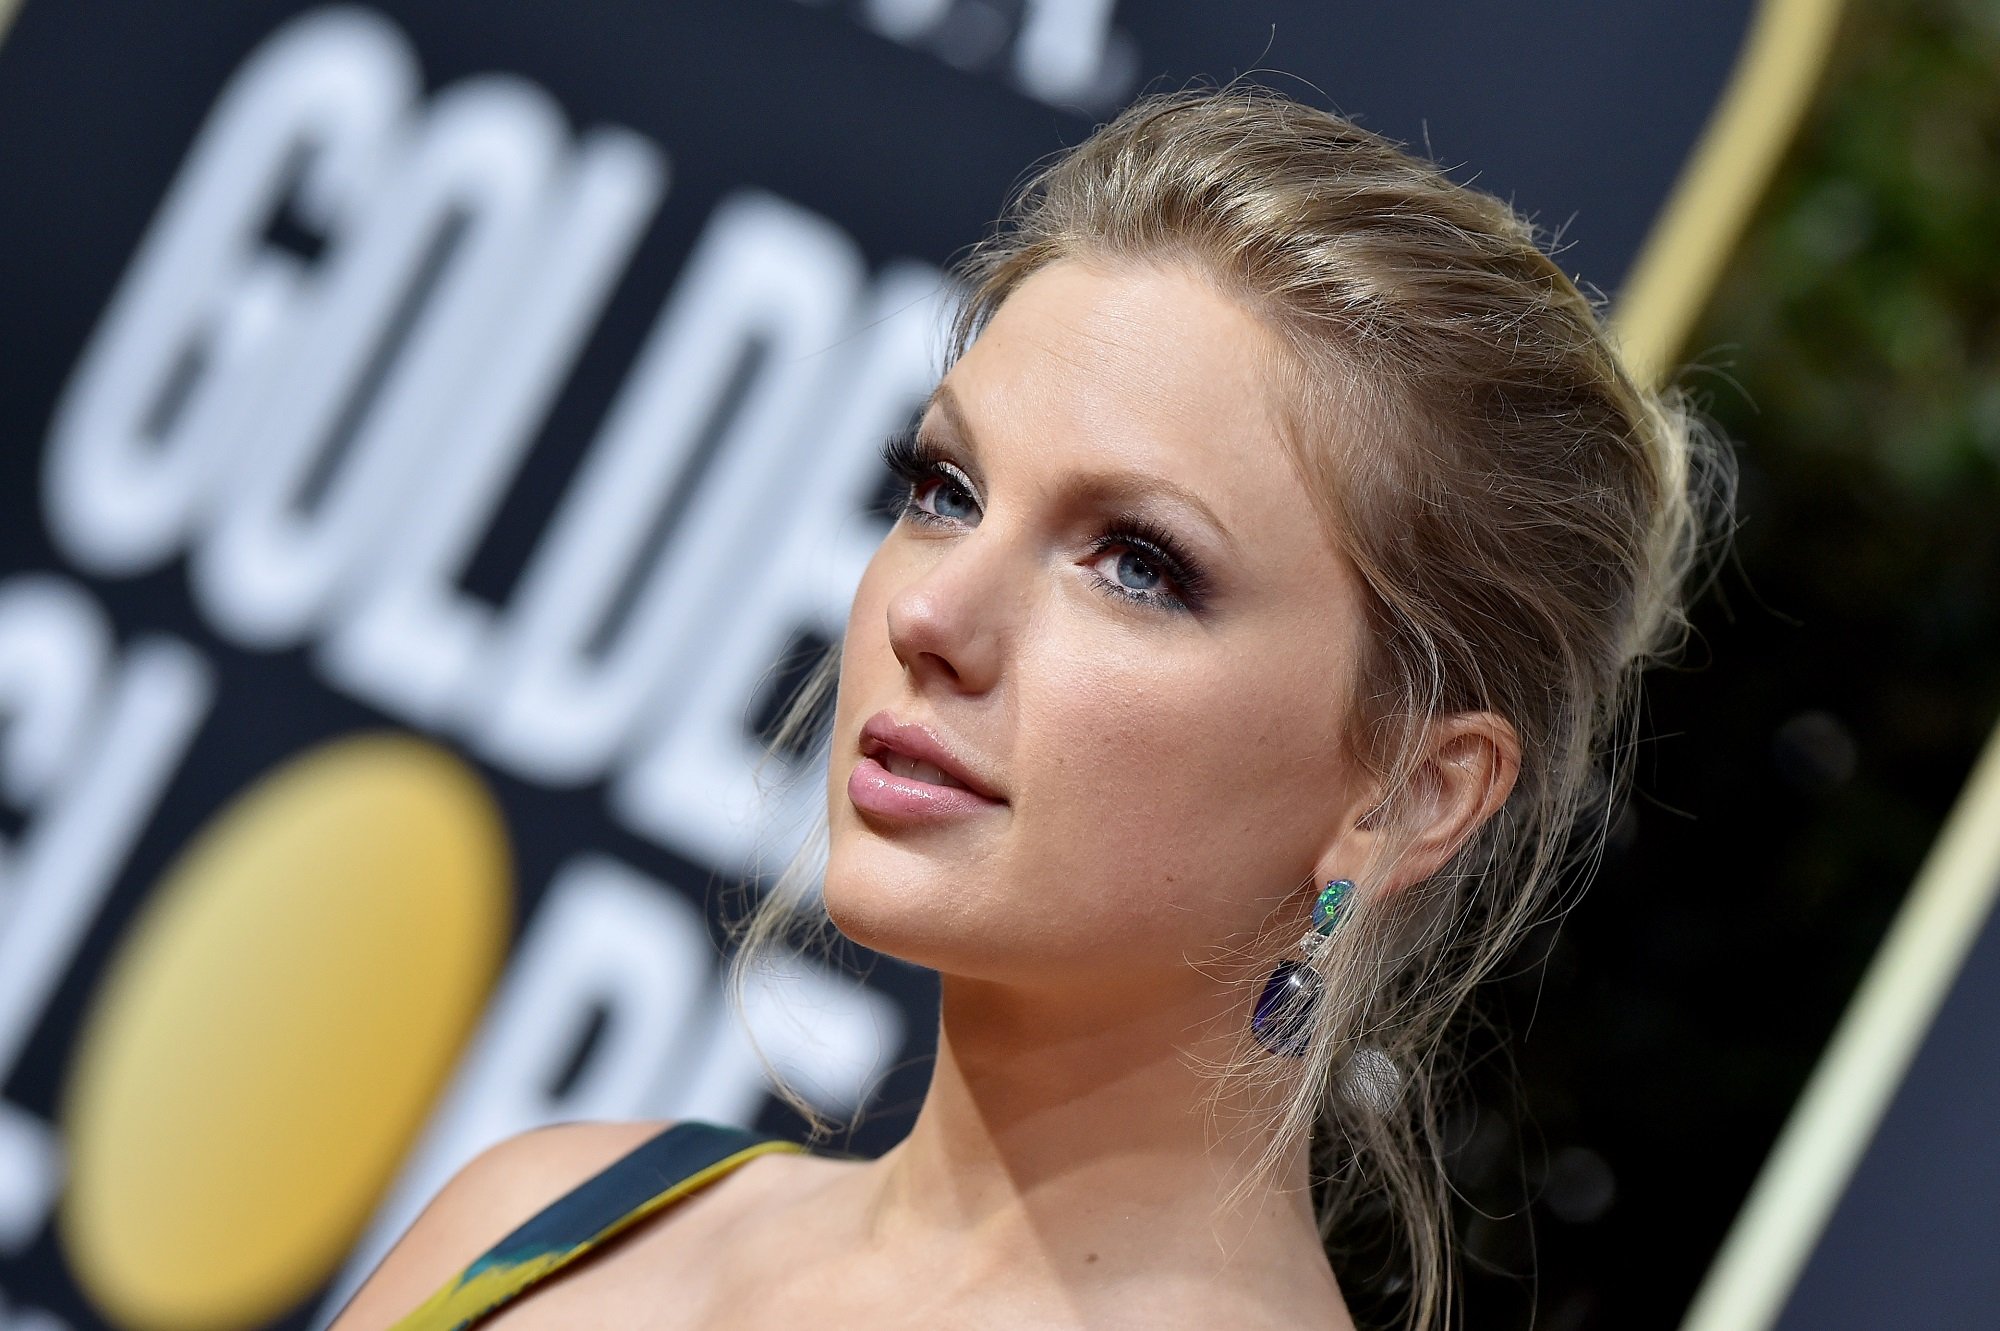 Taylor Swift at the 77th Annual Golden Globe Awards on January 5, 2020